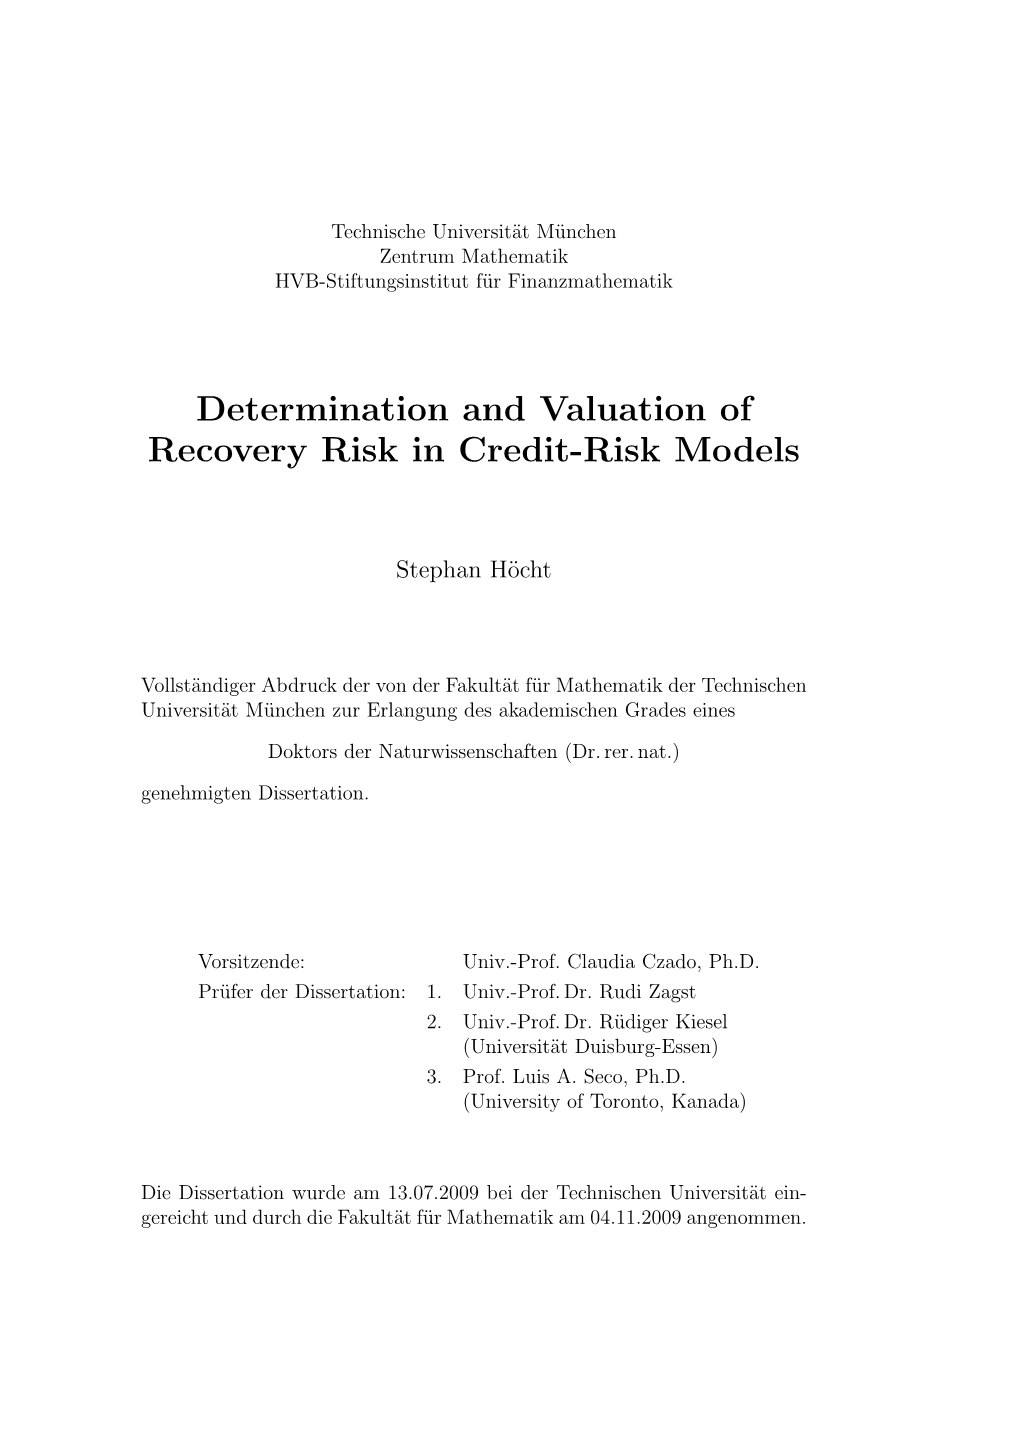 Determination and Valuation of Recovery Risk in Credit-Risk Models